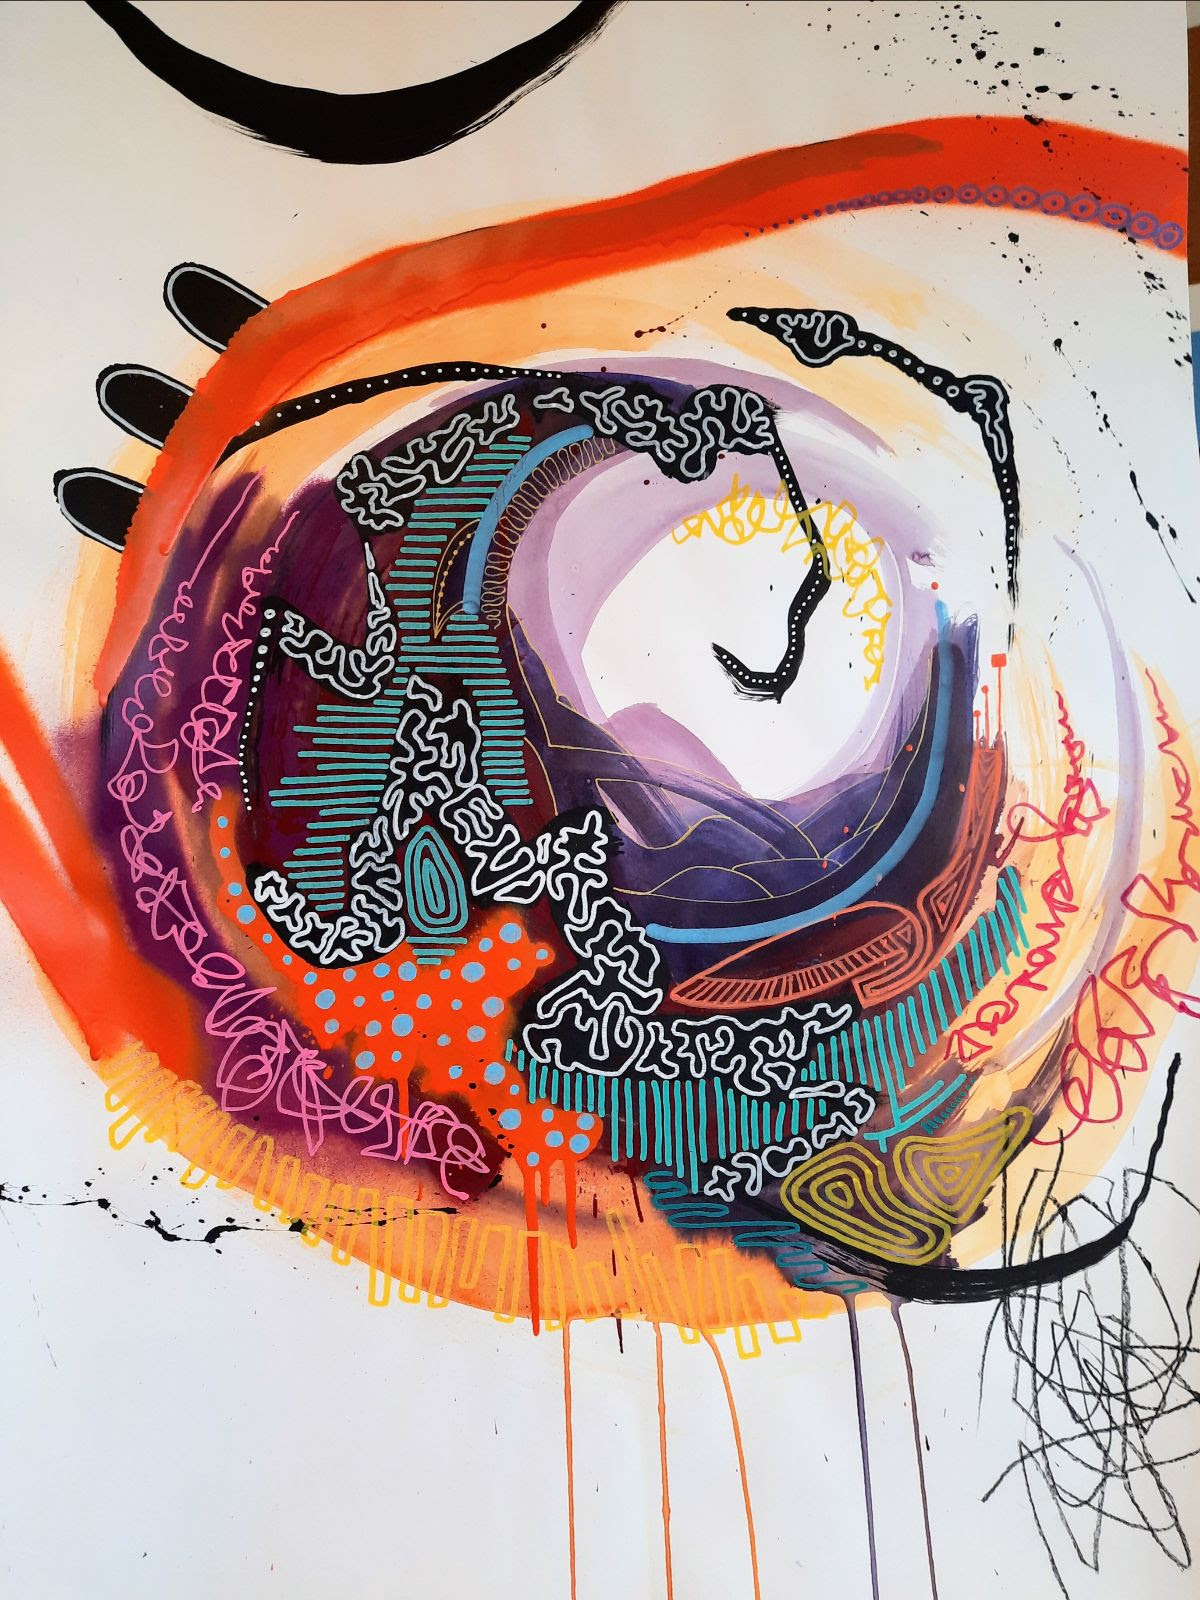 An abstract painting with a swirl of orange, purple, and light blue, with white in the centre and background, and what might be black fingers poking out from the top left of the swirl.